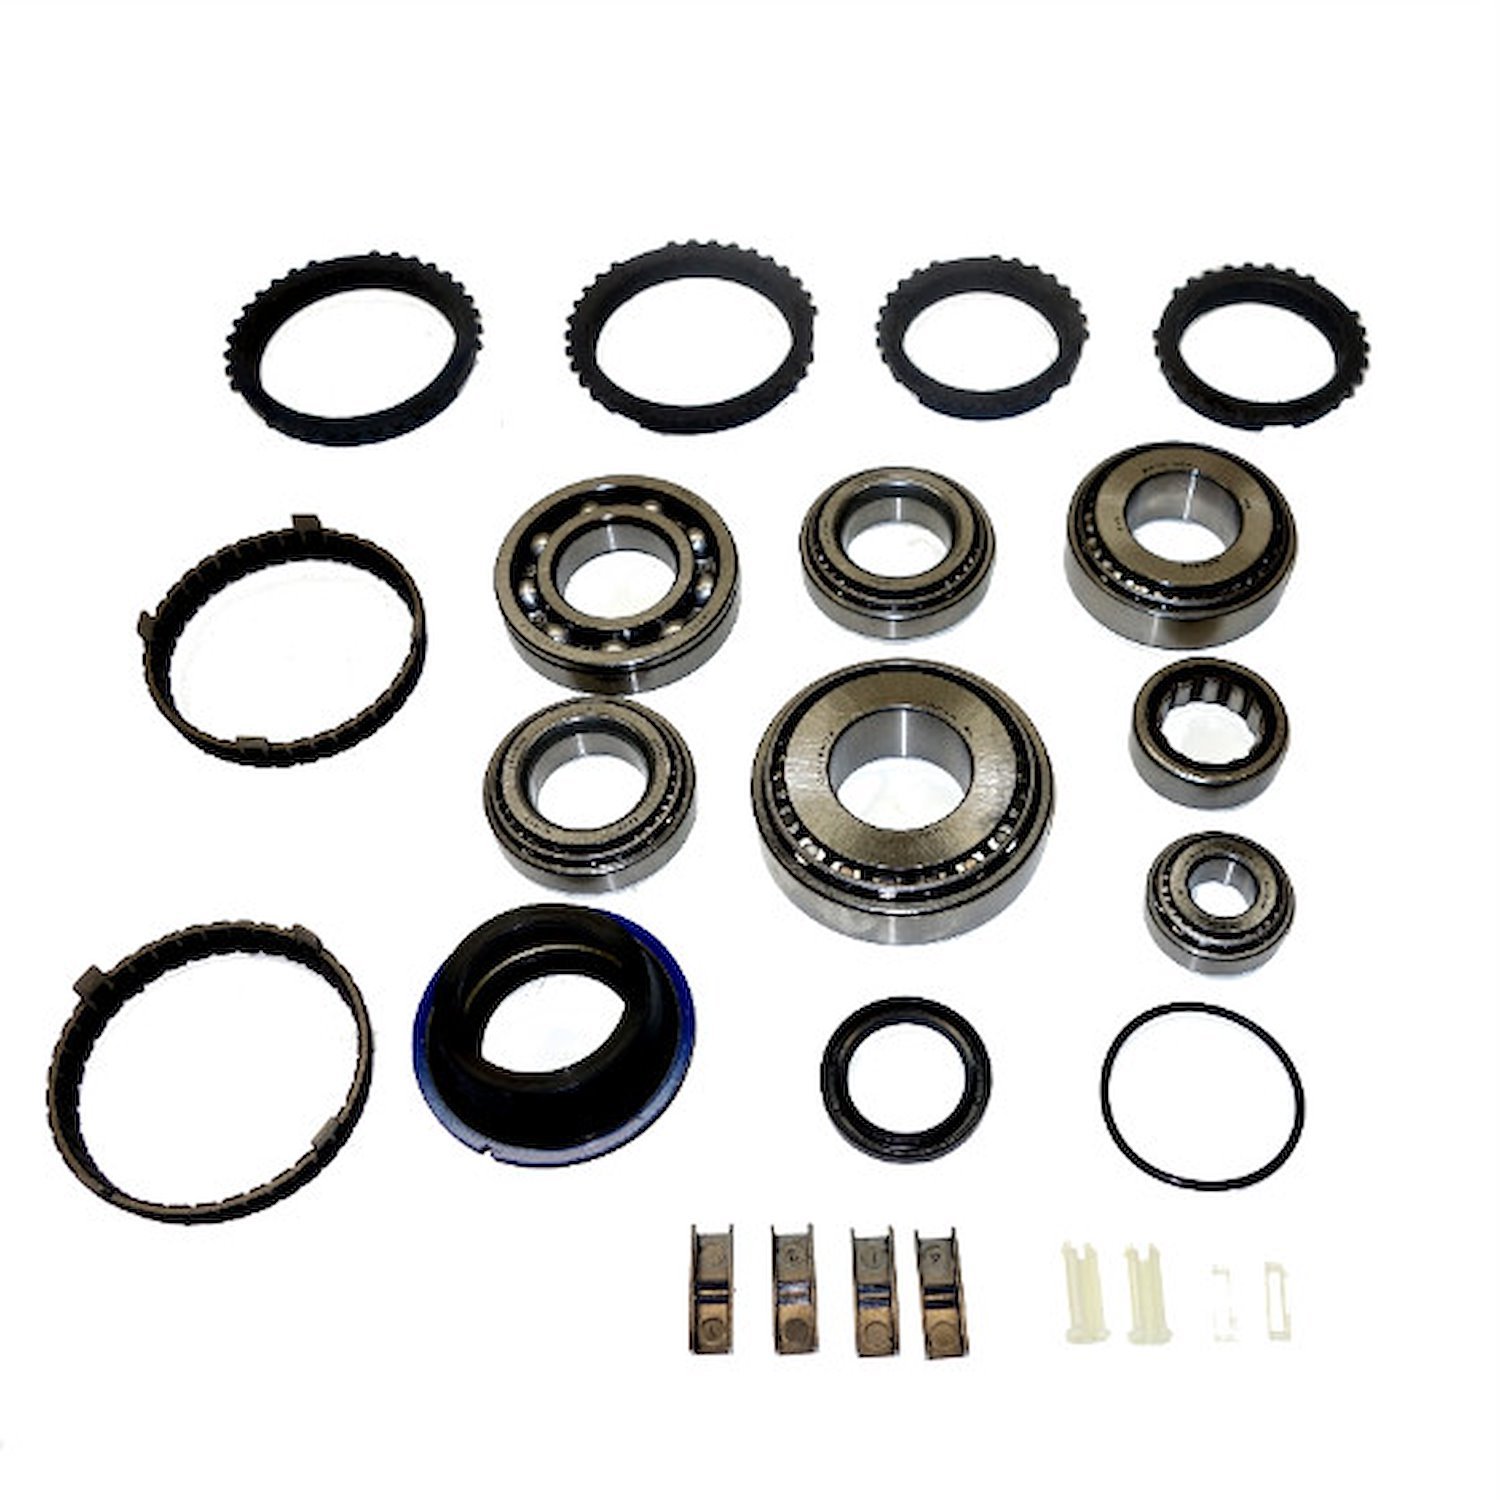 USA Standard 77015 Manual Transmission T45 Bearing Kit, 1996-1998 Ford Mustang 4.6L With Synchros